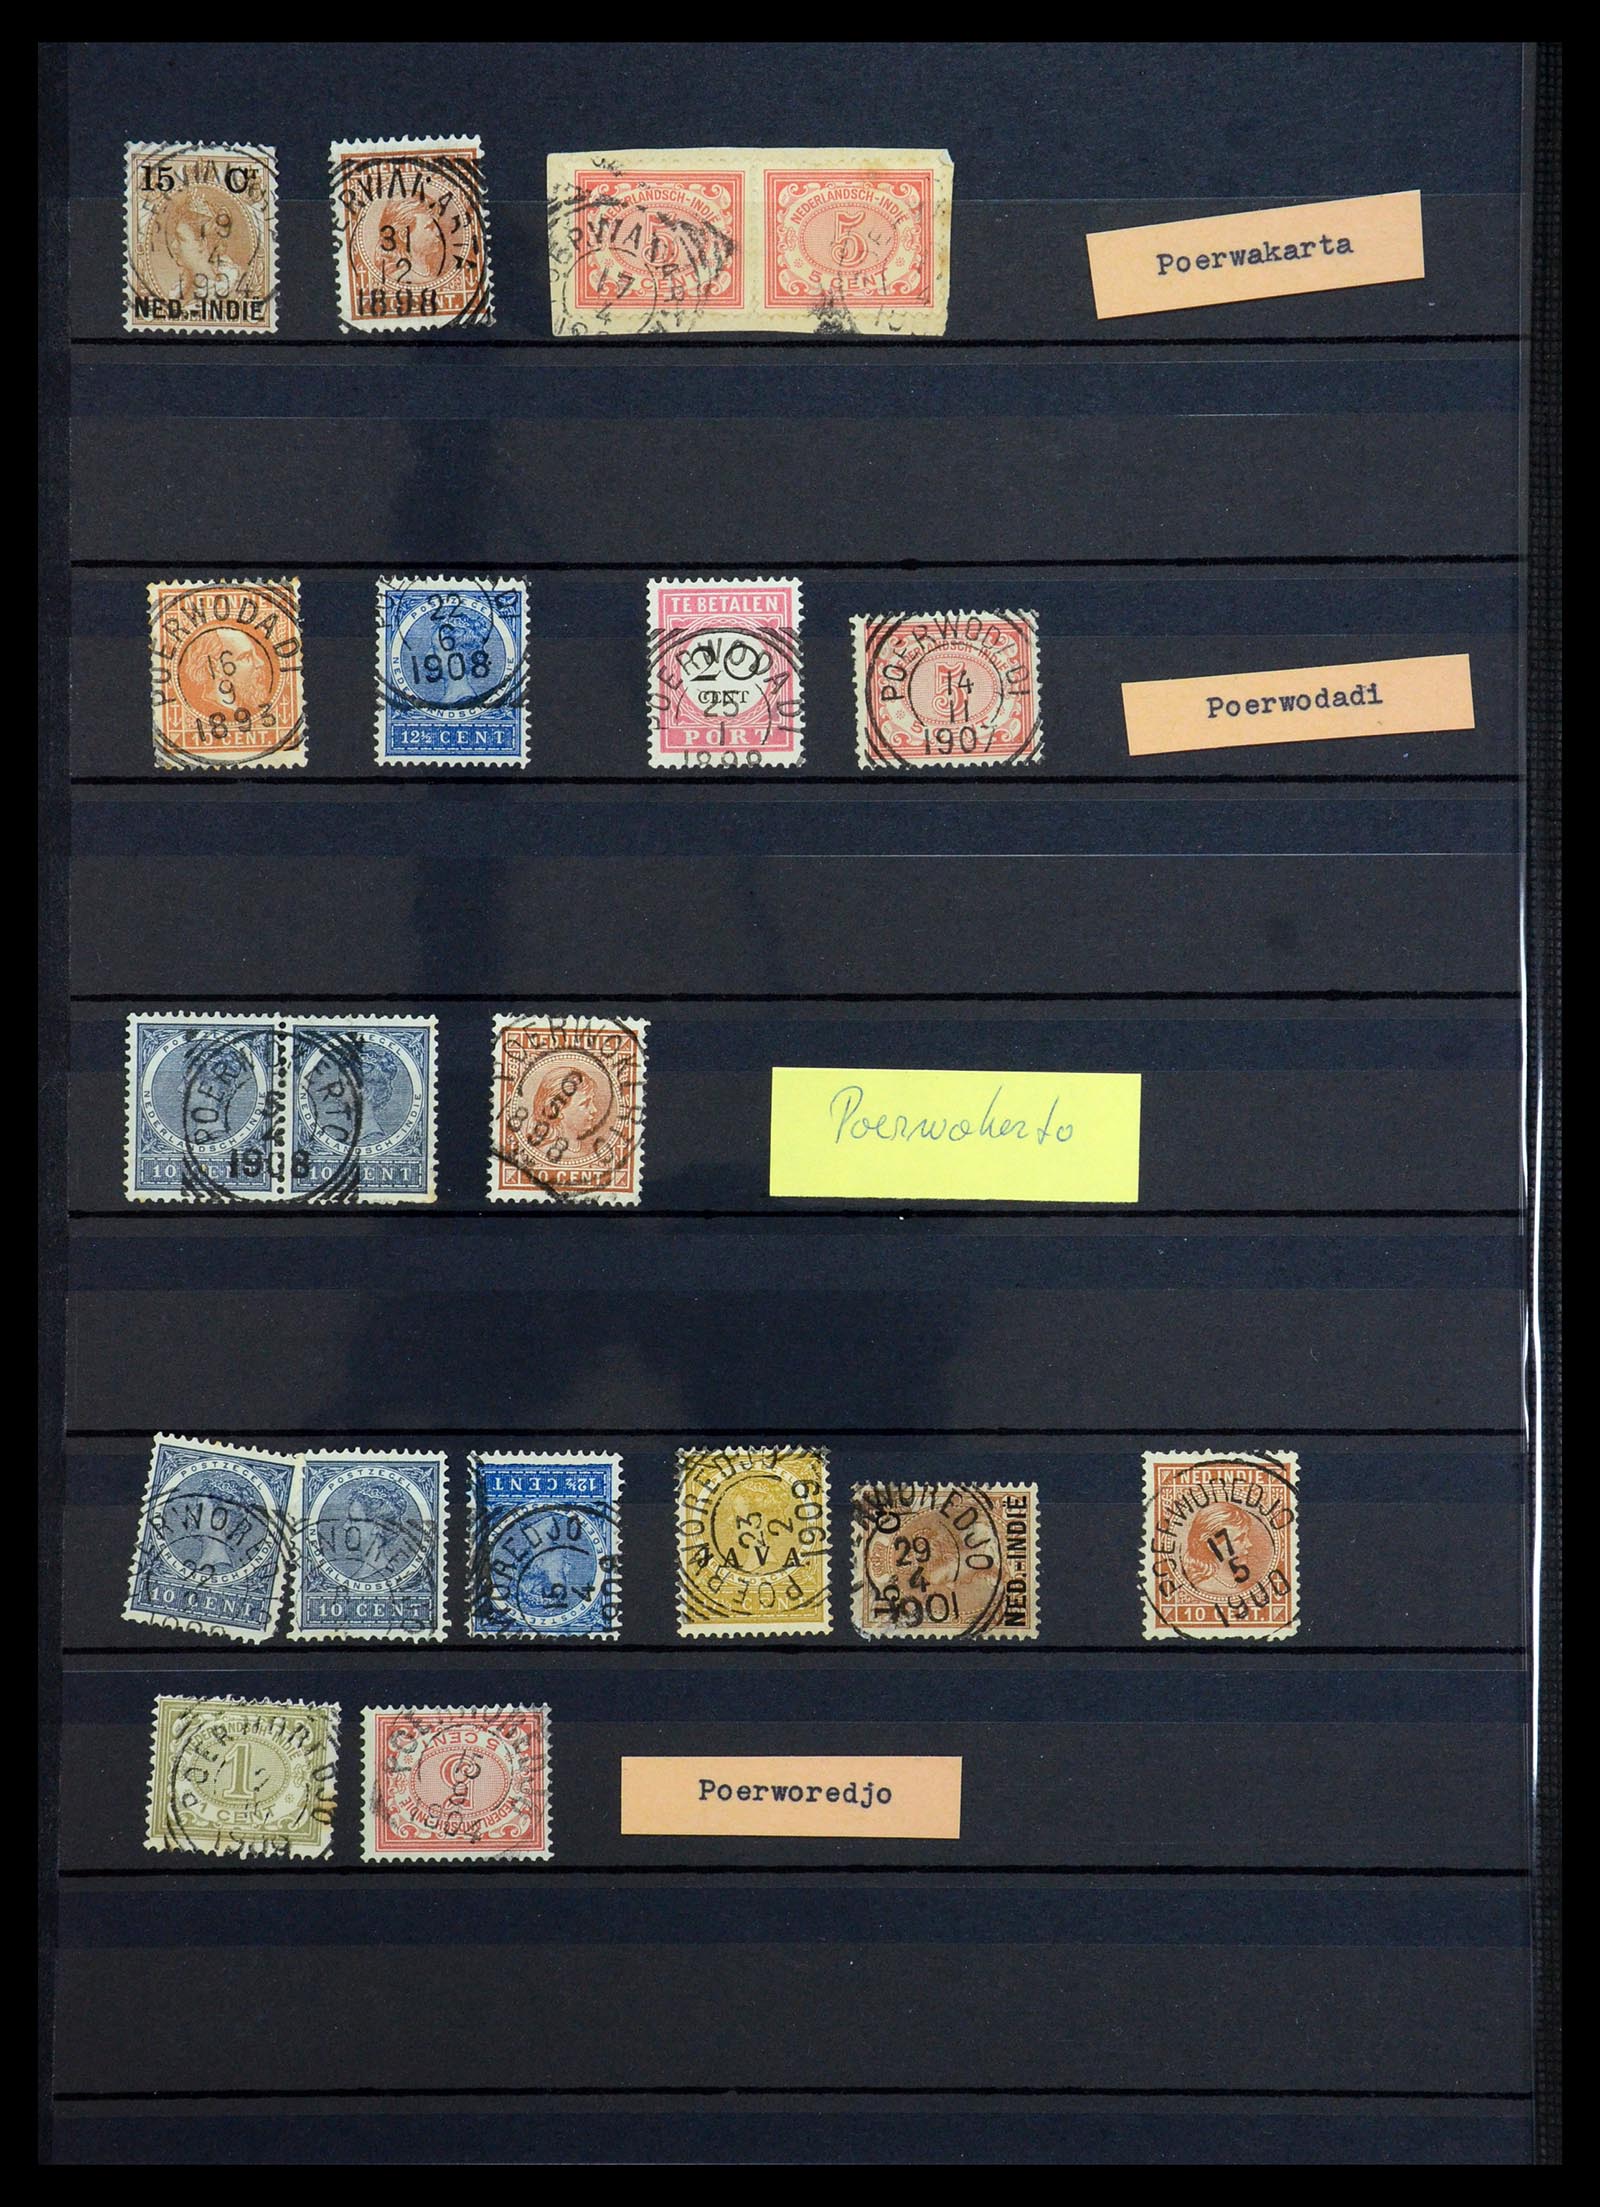 36371 040 - Stamp collection 36371 Dutch east Indies cancels.